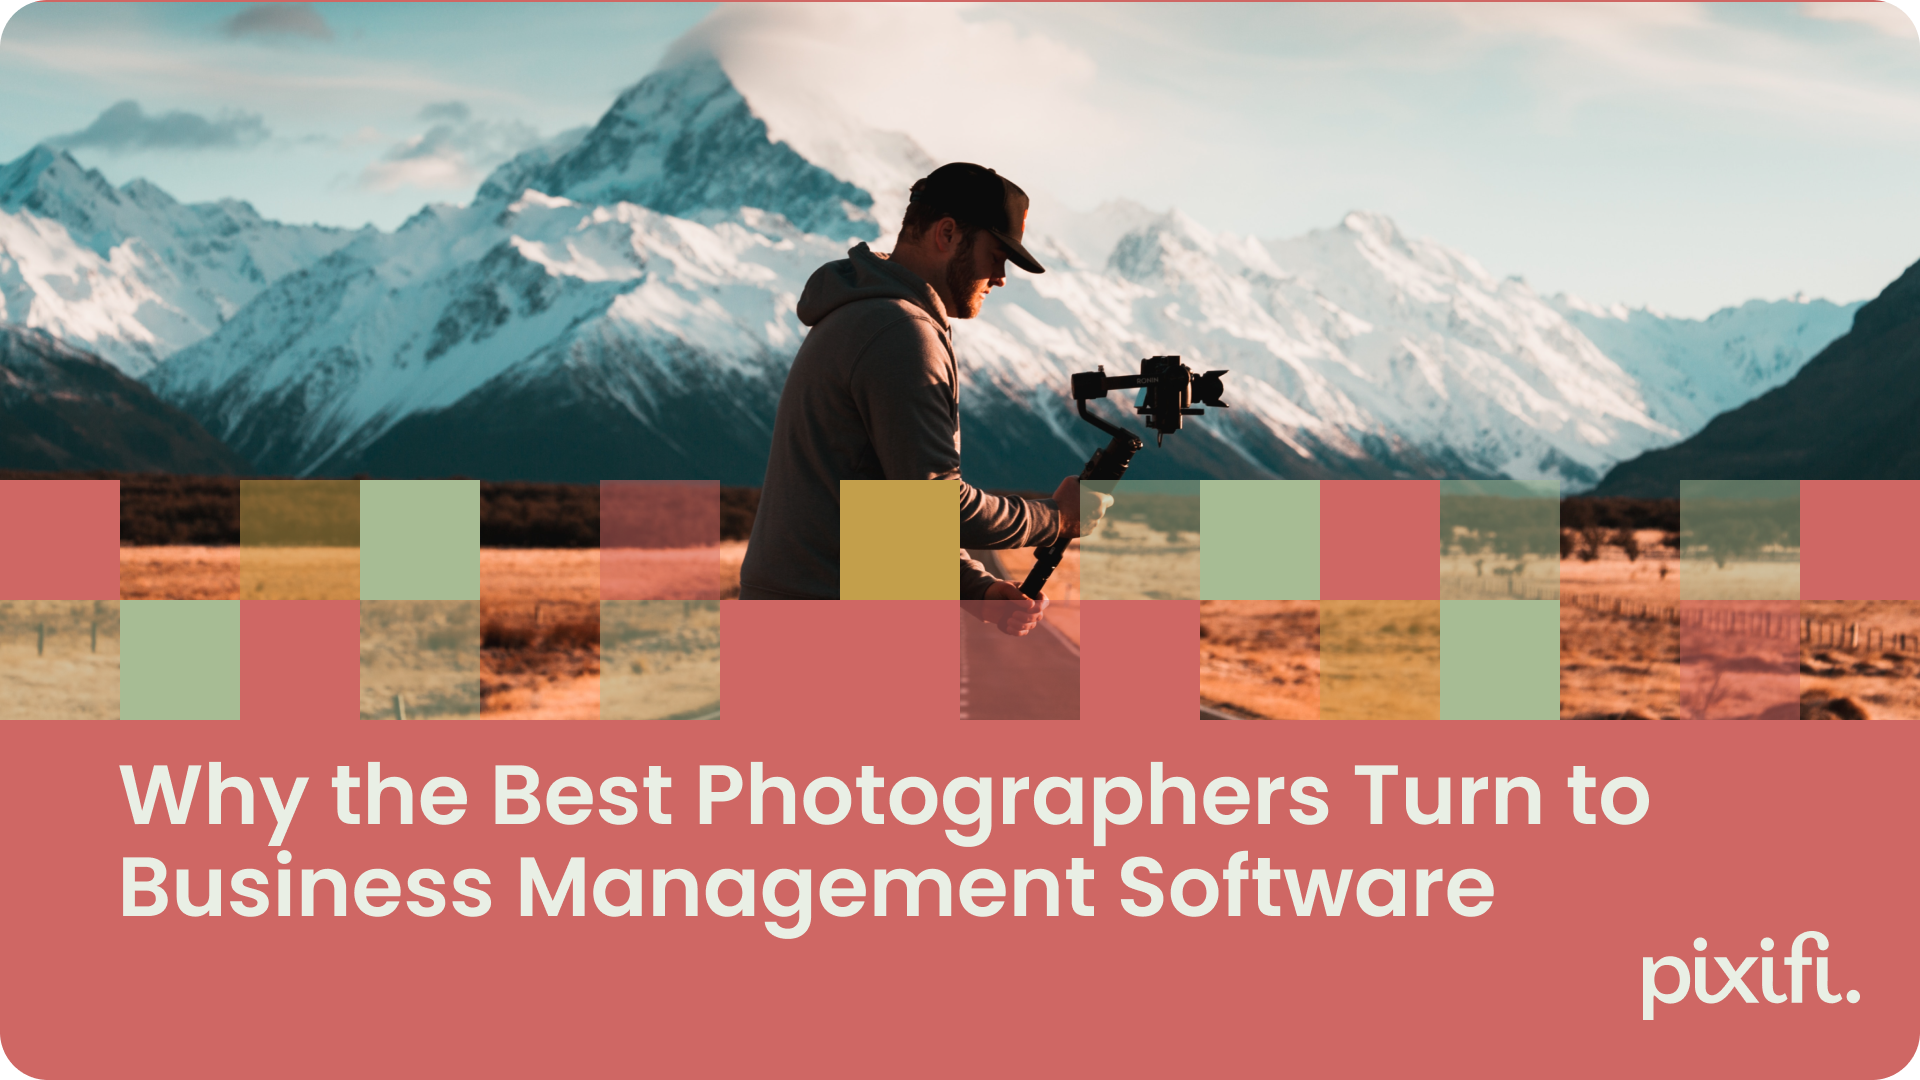 Why the Best Photographers Turn to Business Management Software